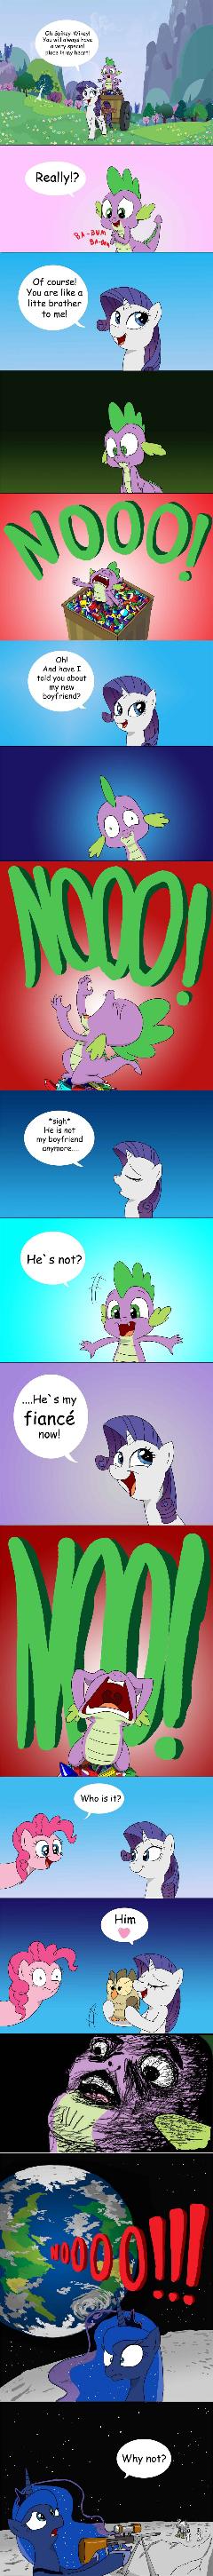 About Spike and Rarity